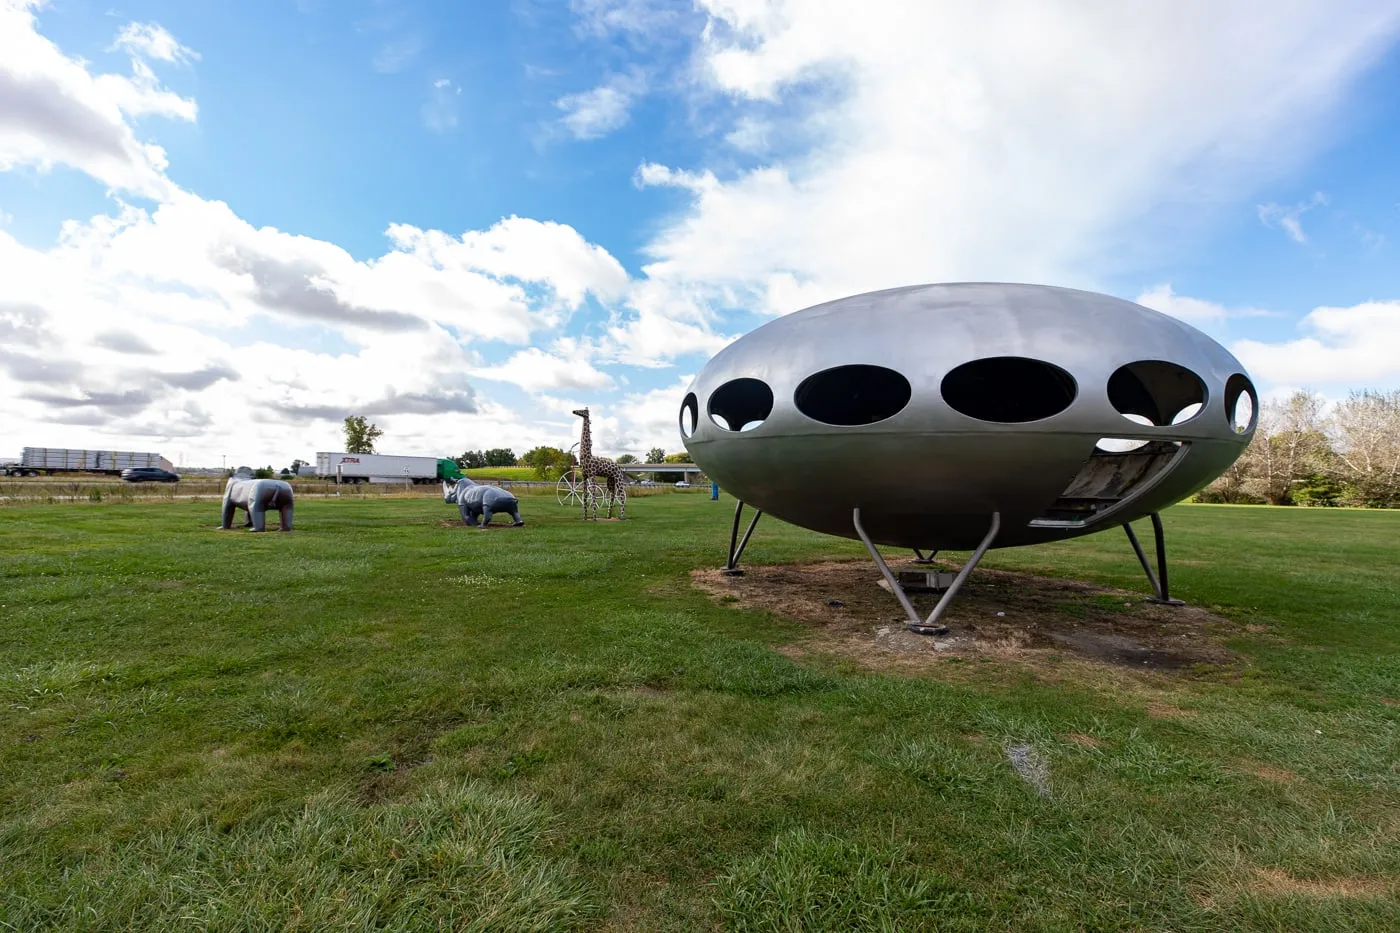 Futuro House UFO shaped home at the Pink Elephant Antique Mall in Livingston, Illinois - Route 66 Roadside Attraction